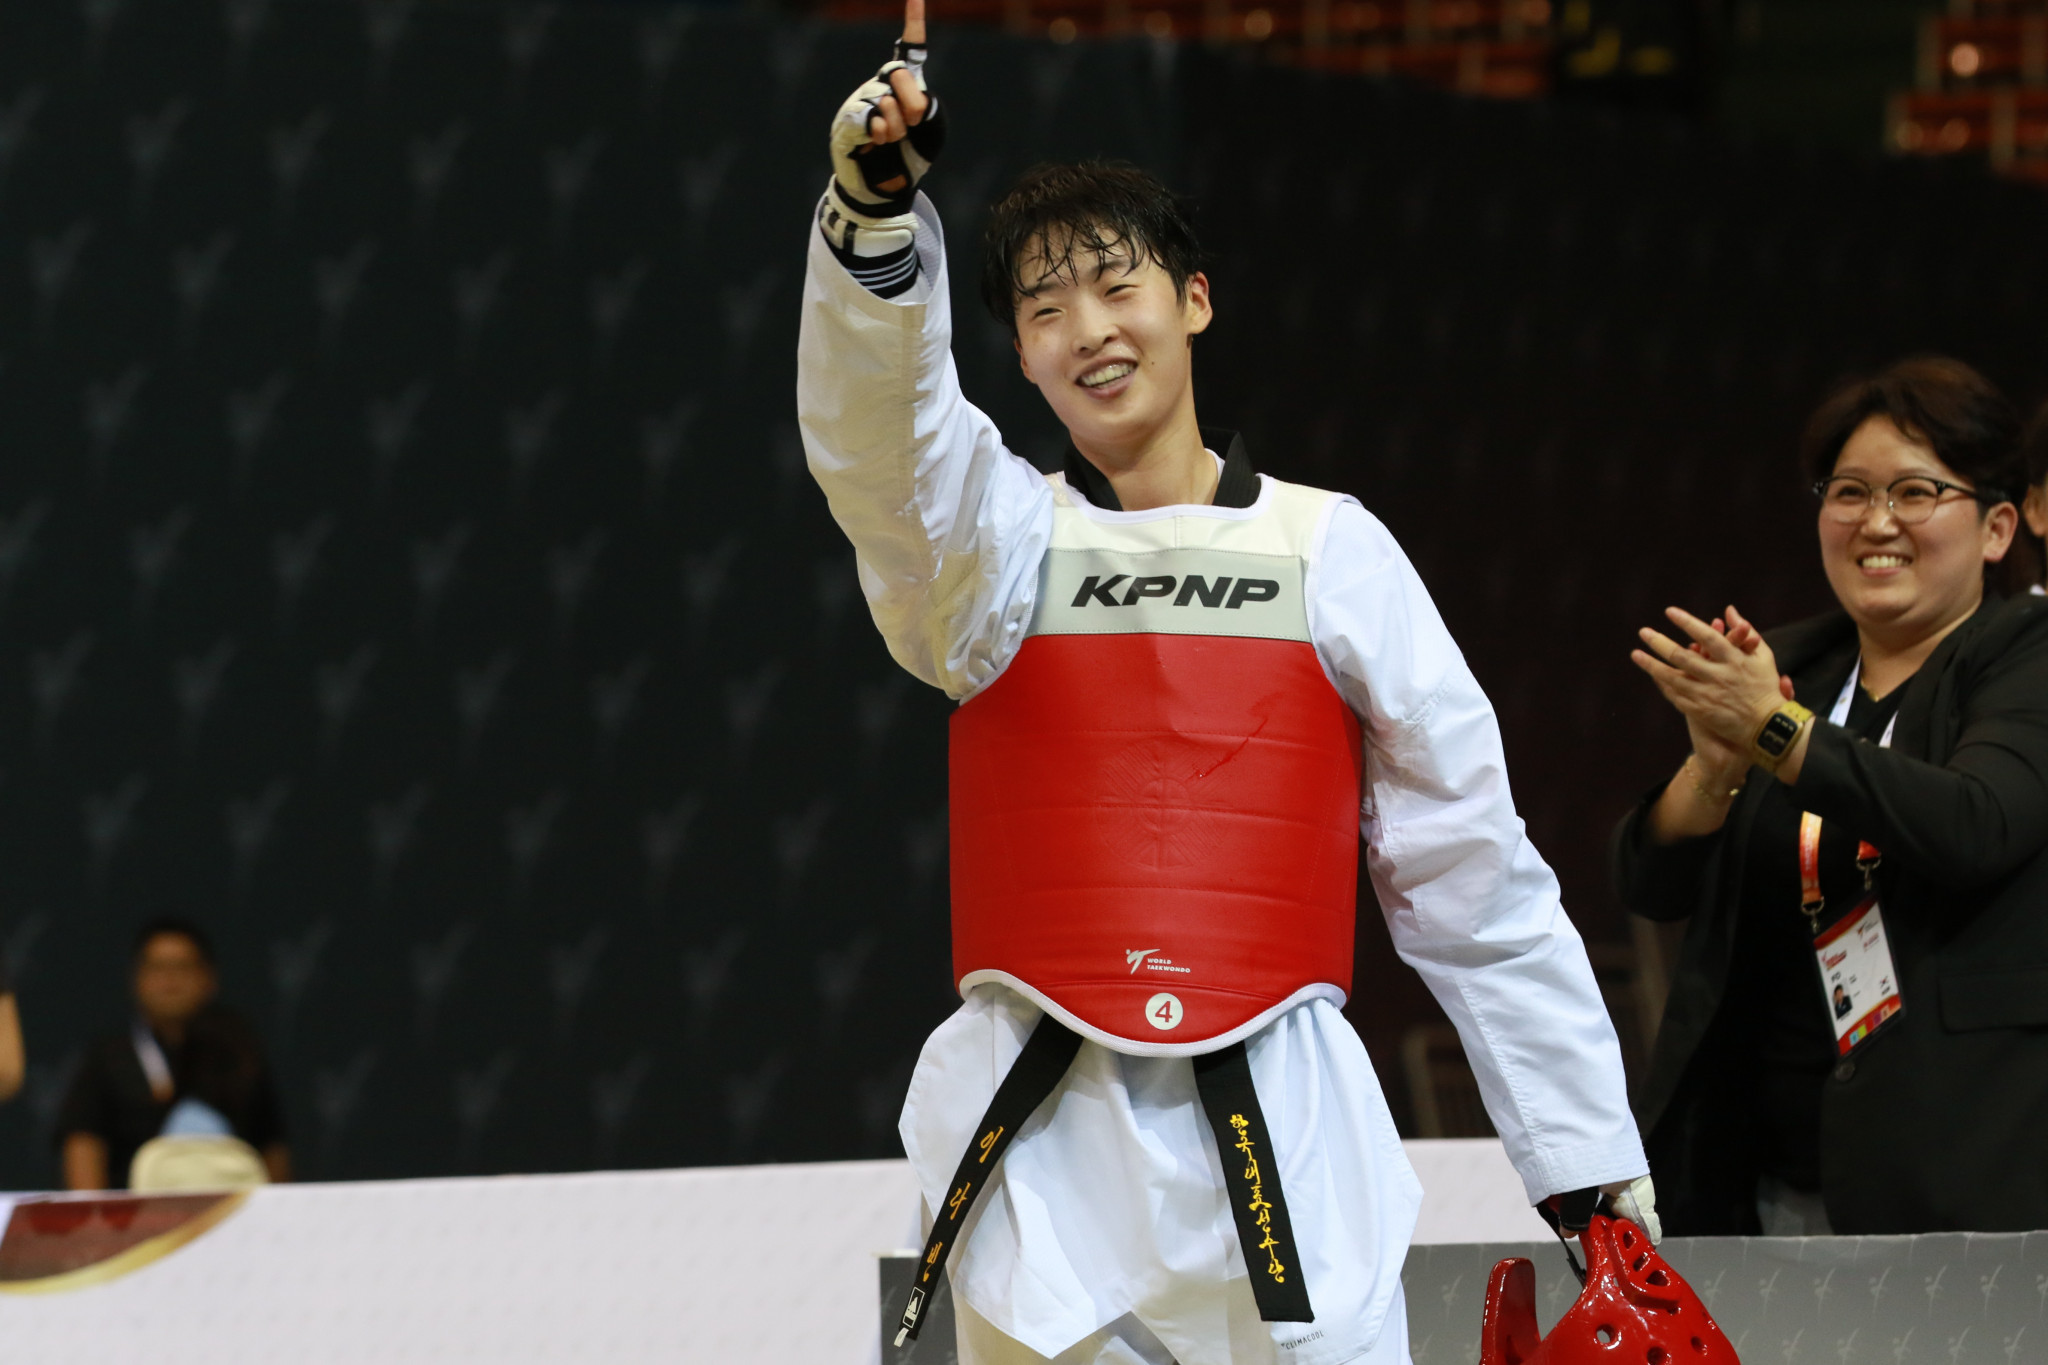 Two gold medals for South Korea on day two of World Taekwondo Grand Prix in Taoyuan